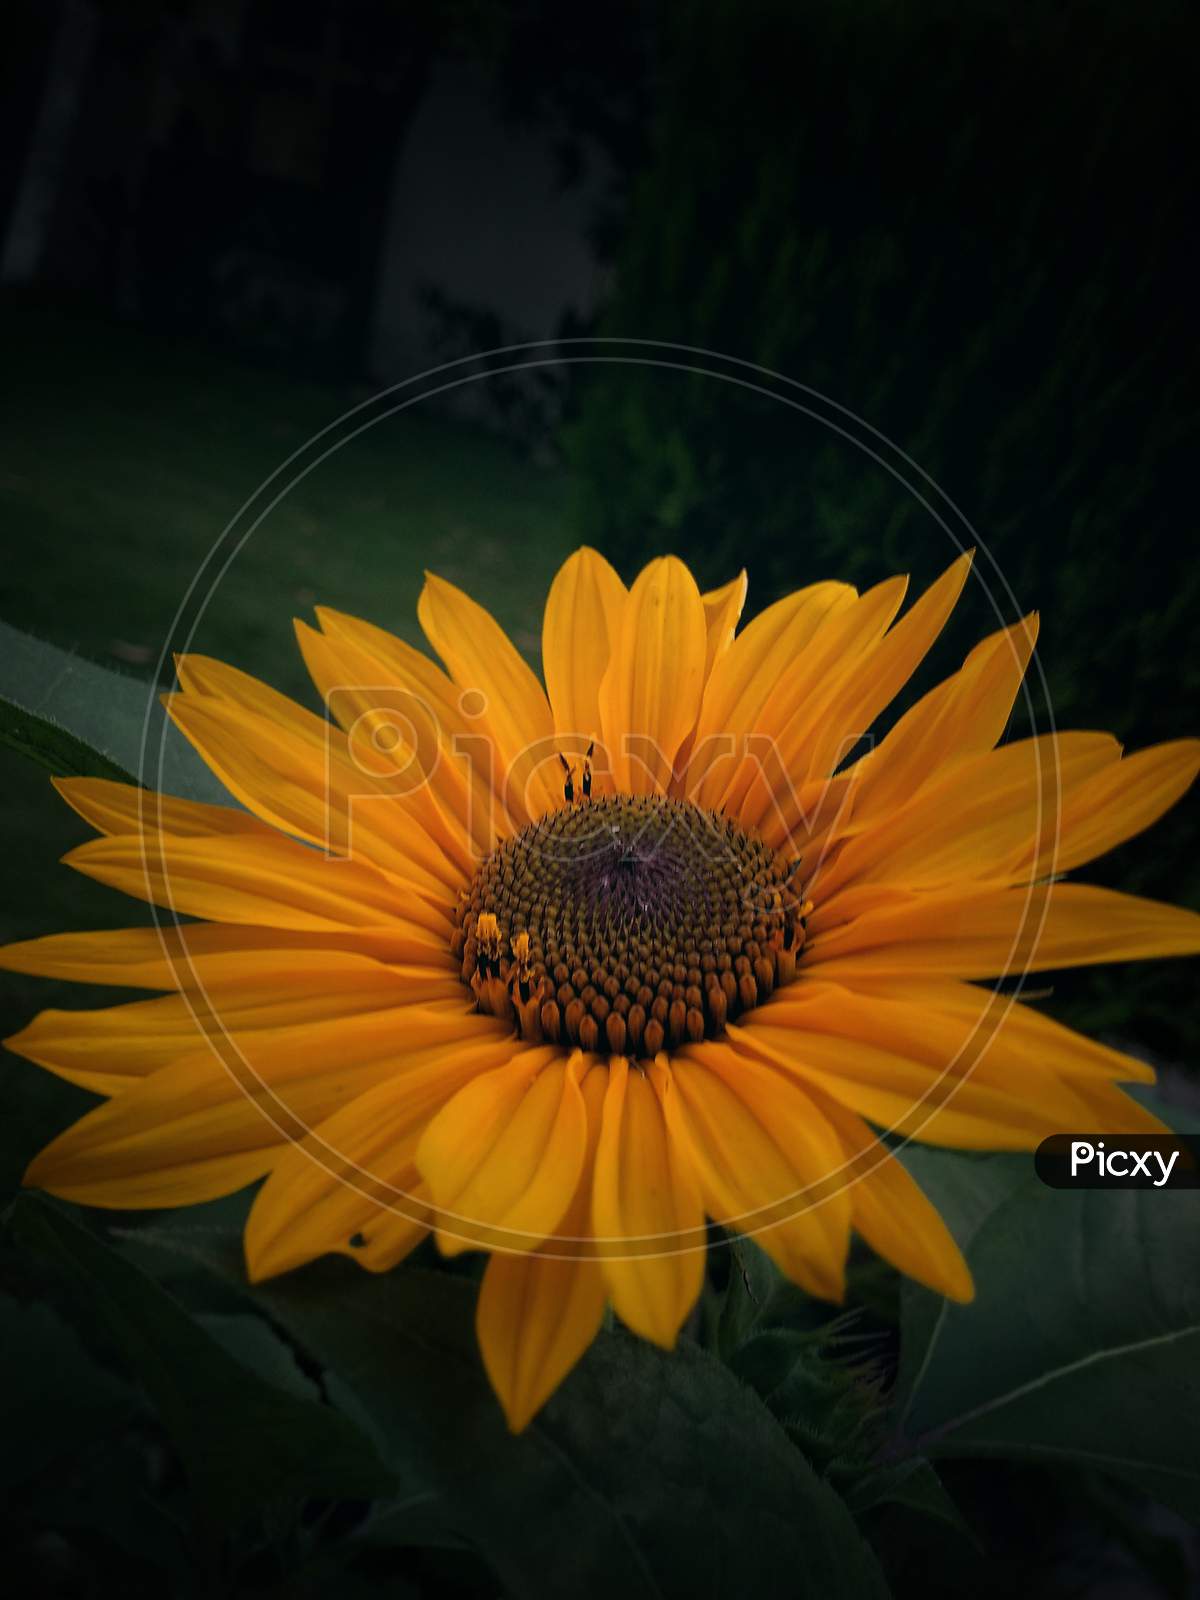 A beautiful picture of sunflower